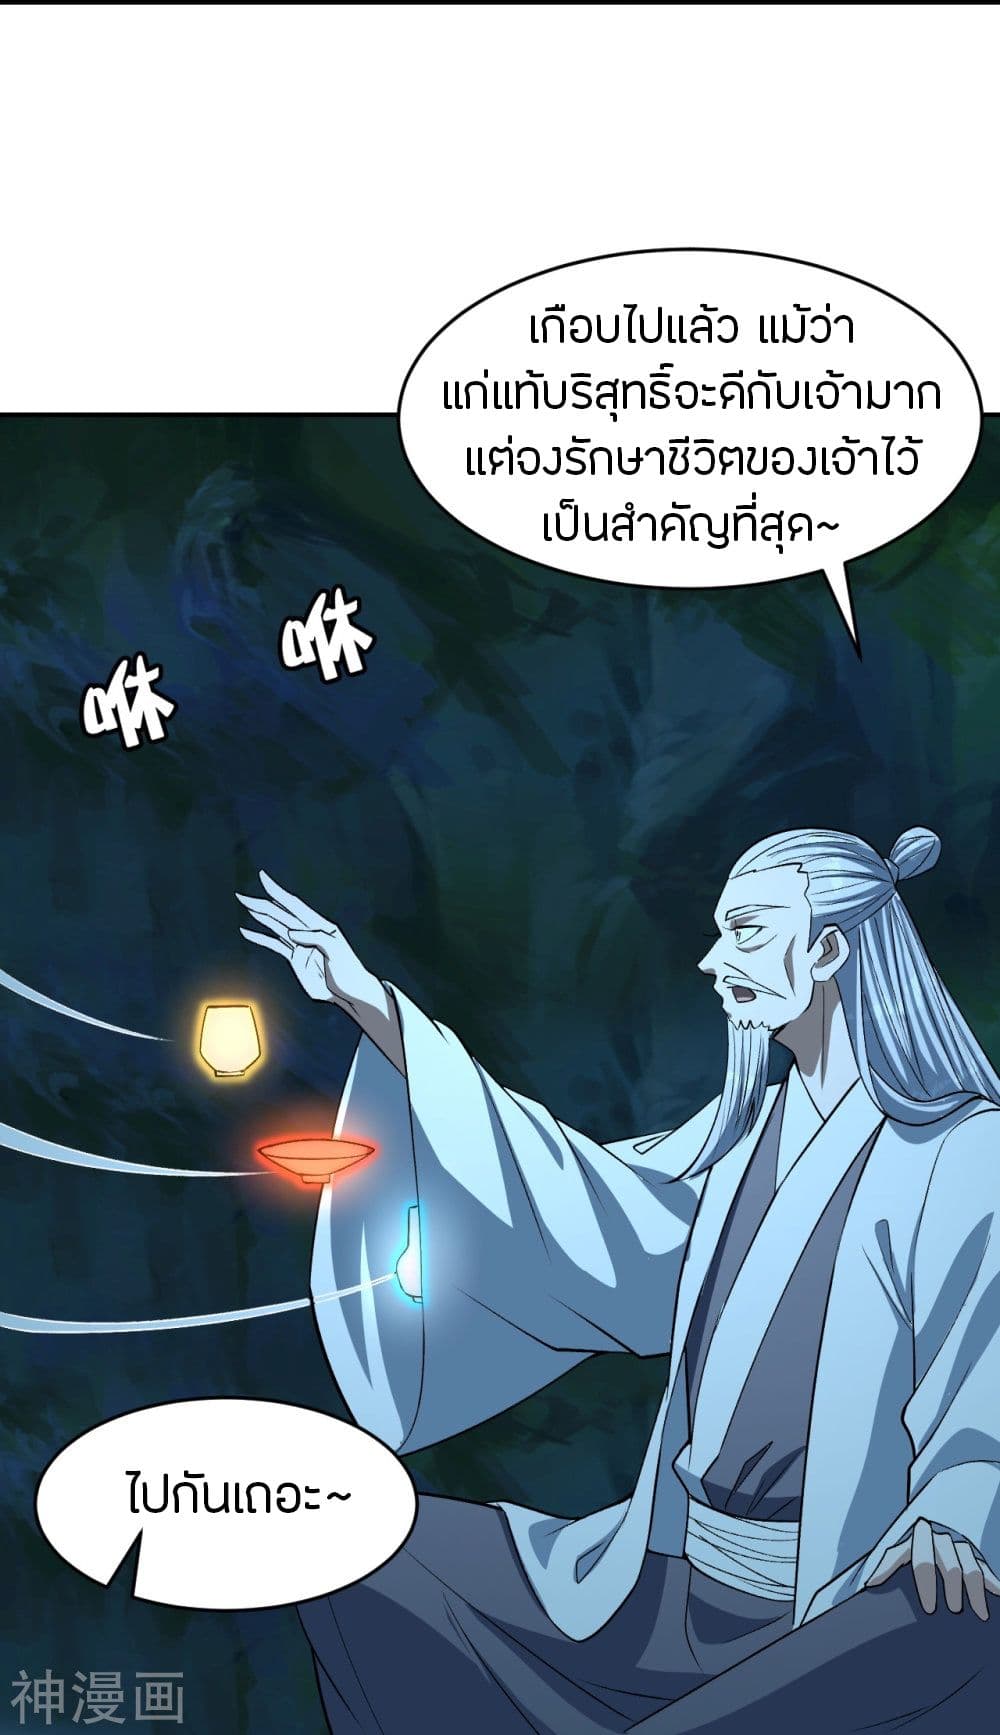 Banished Disciple's Counterattack เธเธฑเธเธฃเธเธฃเธฃเธ”เธดเน€เธเธตเธขเธเธขเธธเธ—เธ 239 (68)